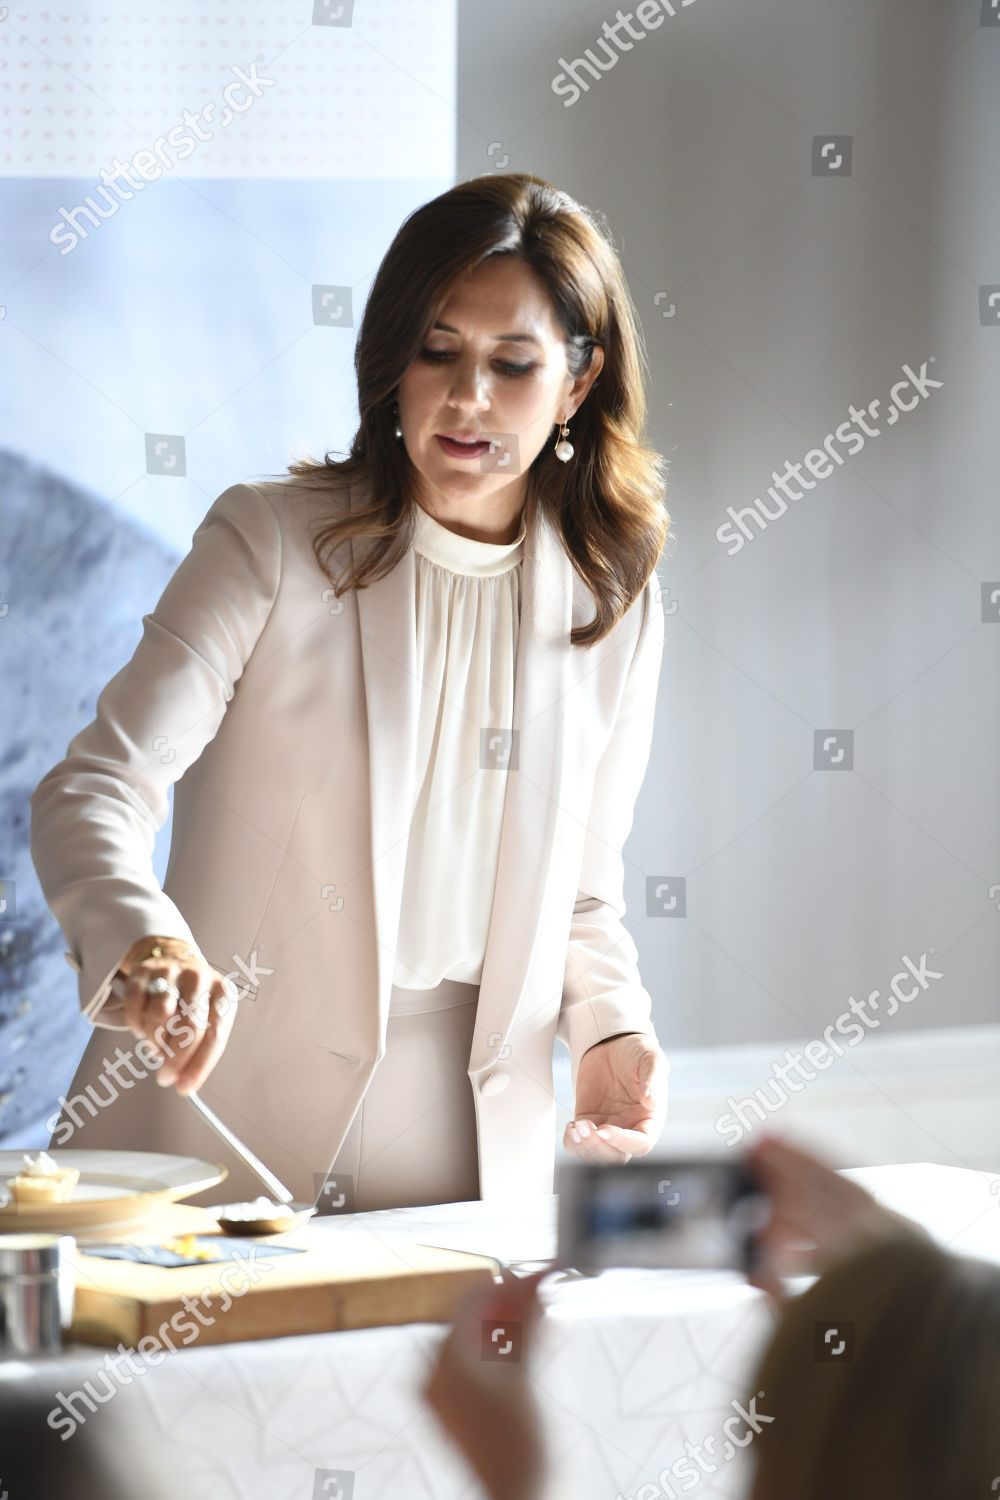 crown-princess-mary-visit-to-finland-shutterstock-editorial-9881096s.jpg